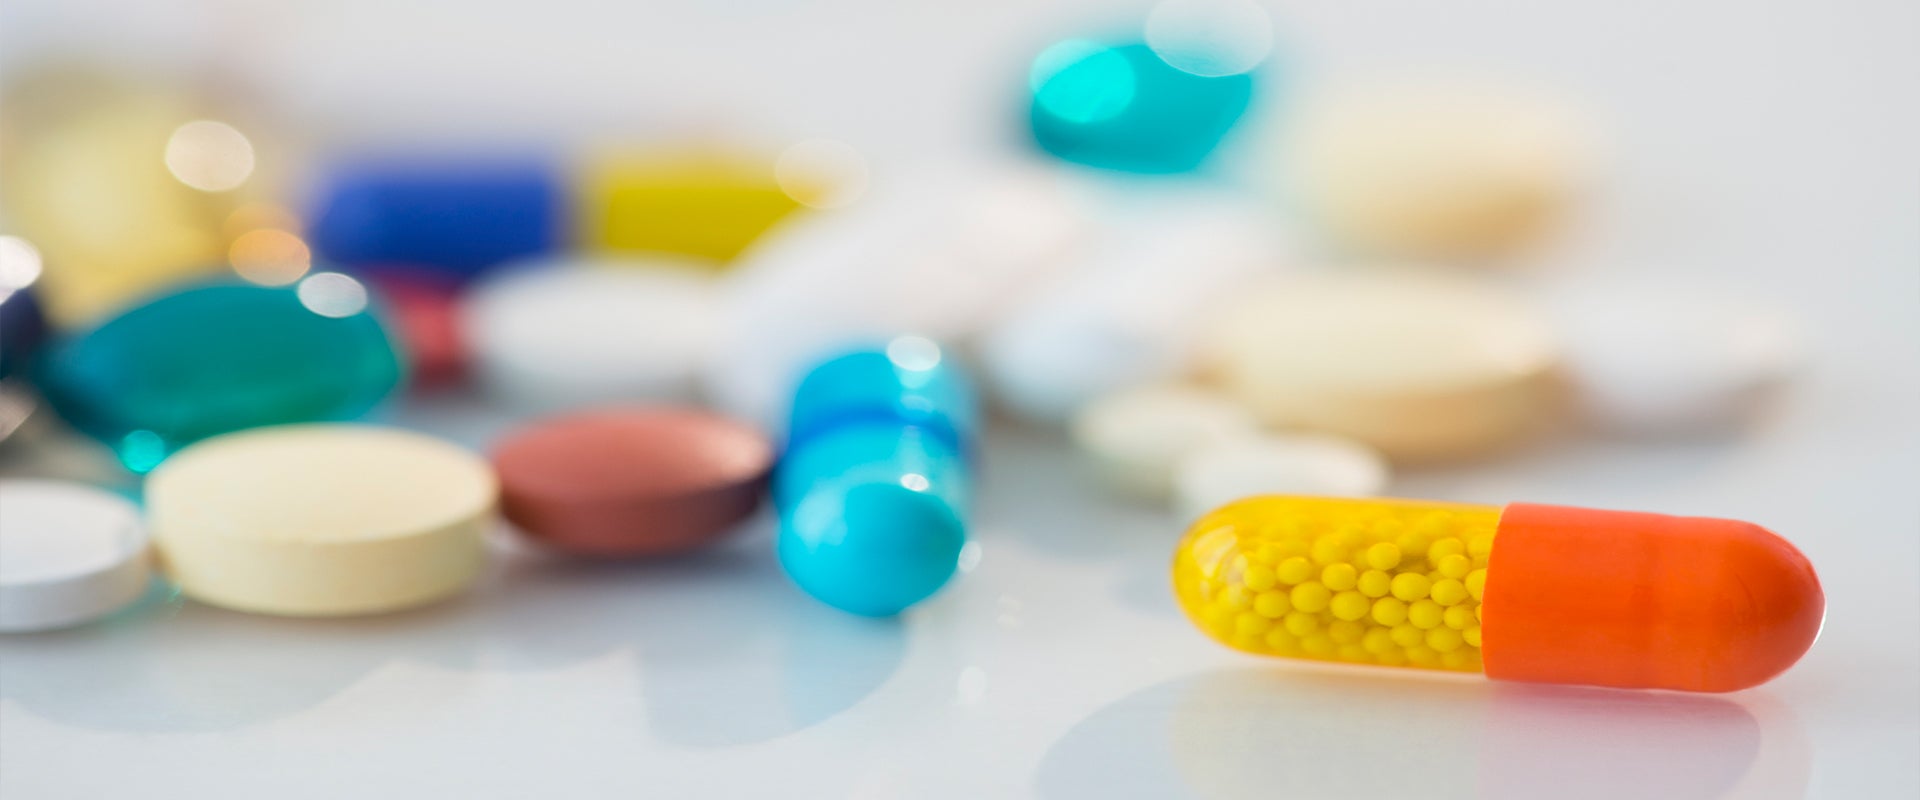 Are Big Deals Back in the Brazilian Pharmaceutical Market?